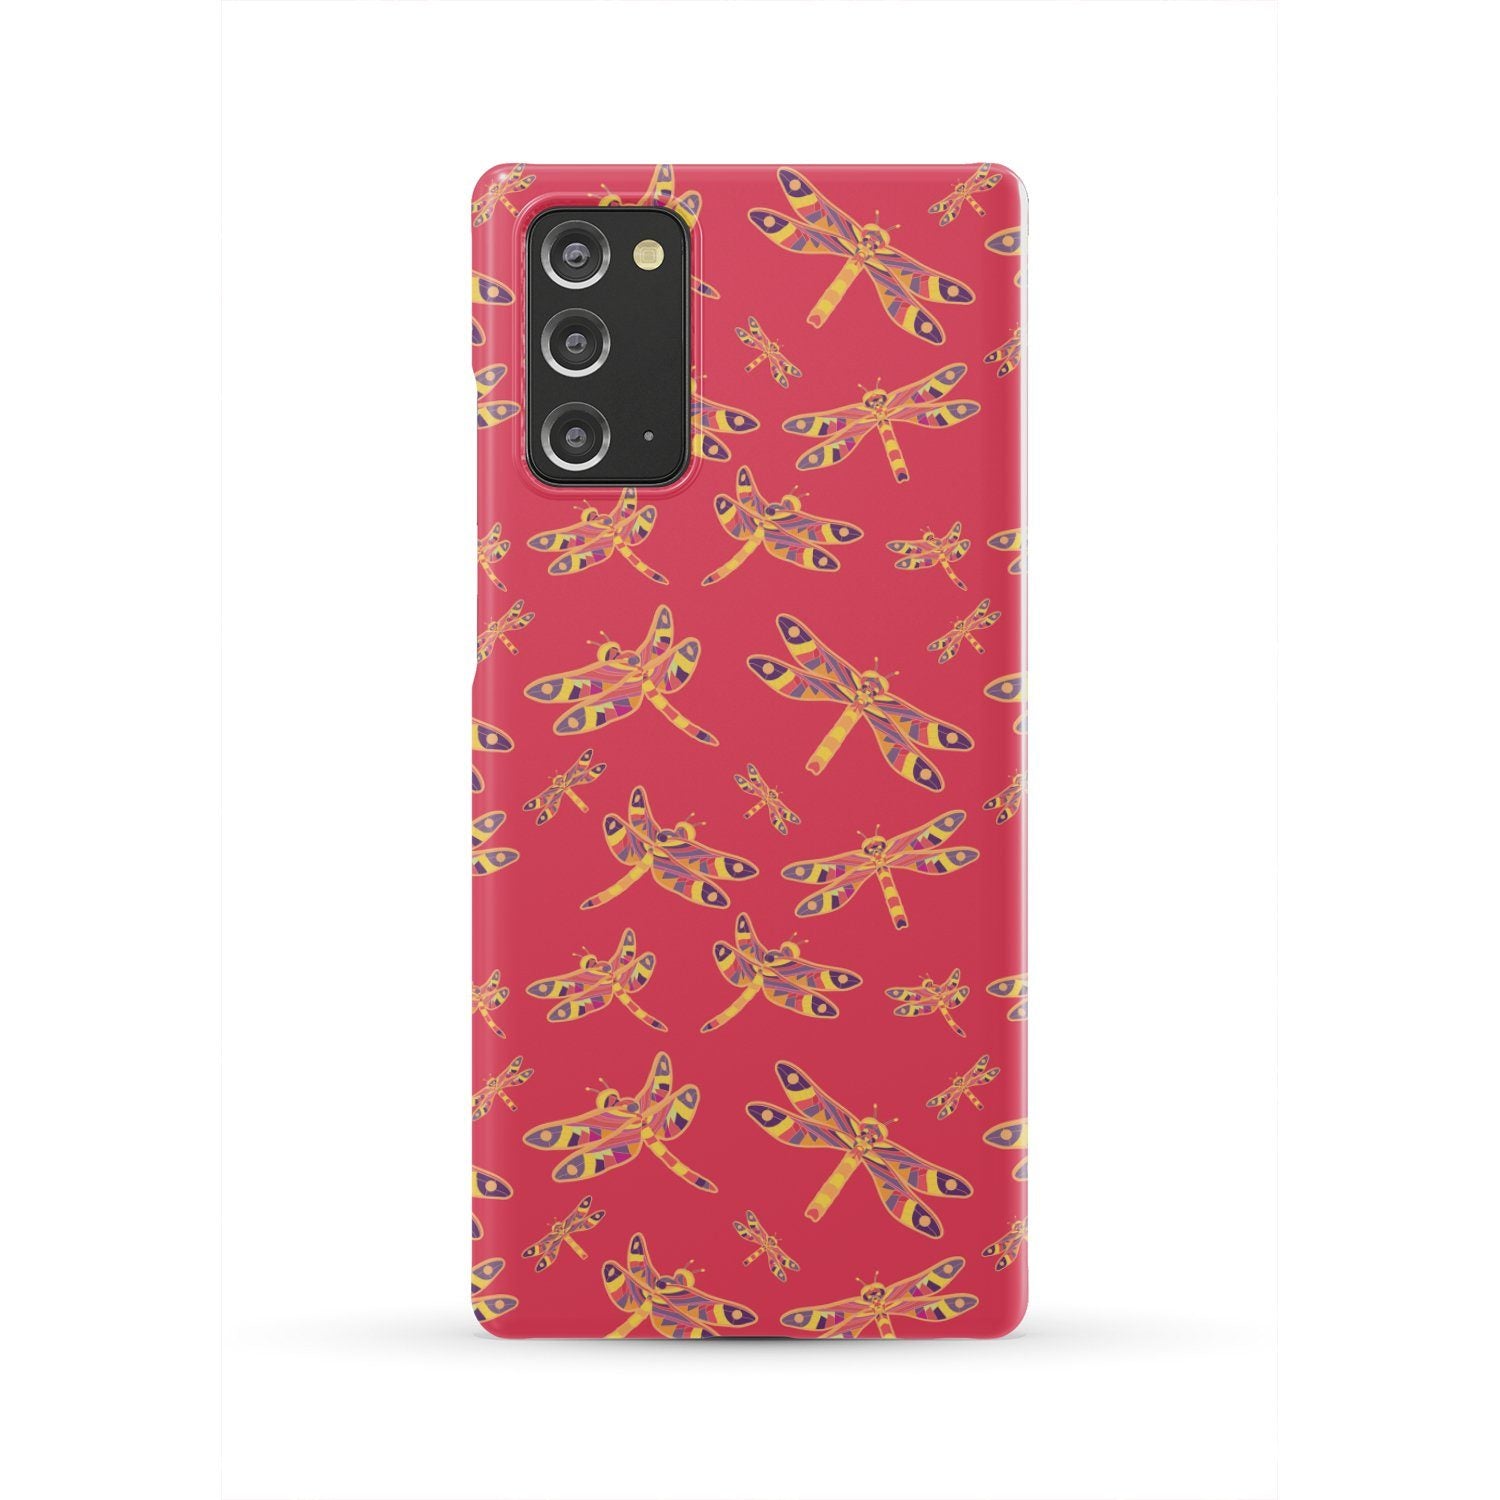 Gathering Rouge Phone Case Phone Case wc-fulfillment Samsung Galaxy Note 20 